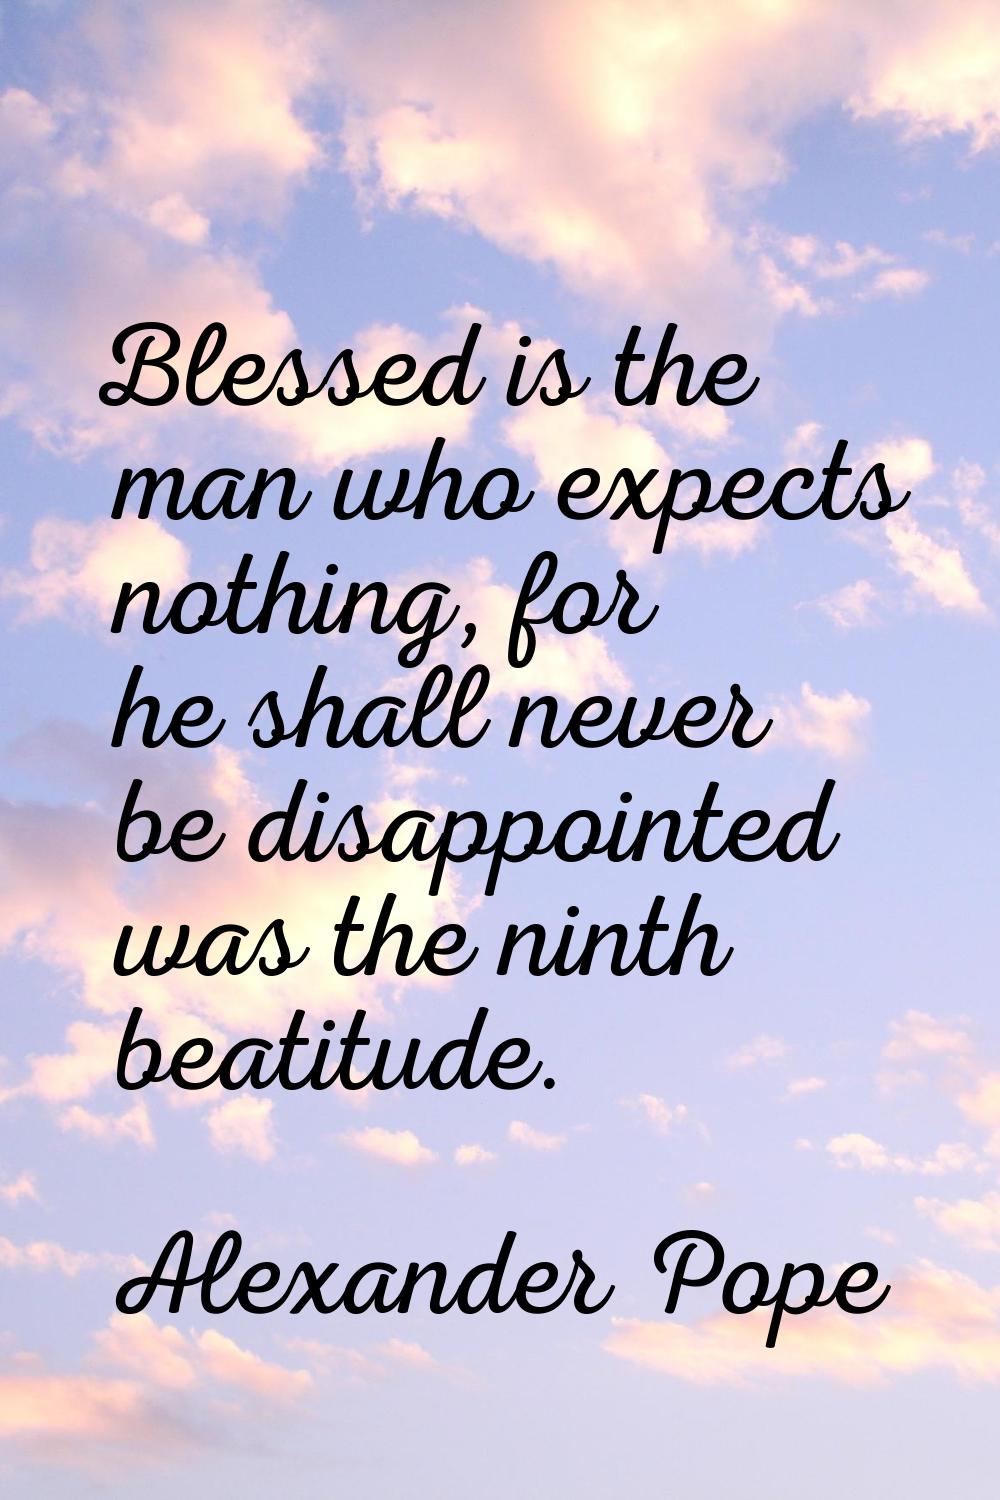 Blessed is the man who expects nothing, for he shall never be disappointed was the ninth beatitude.